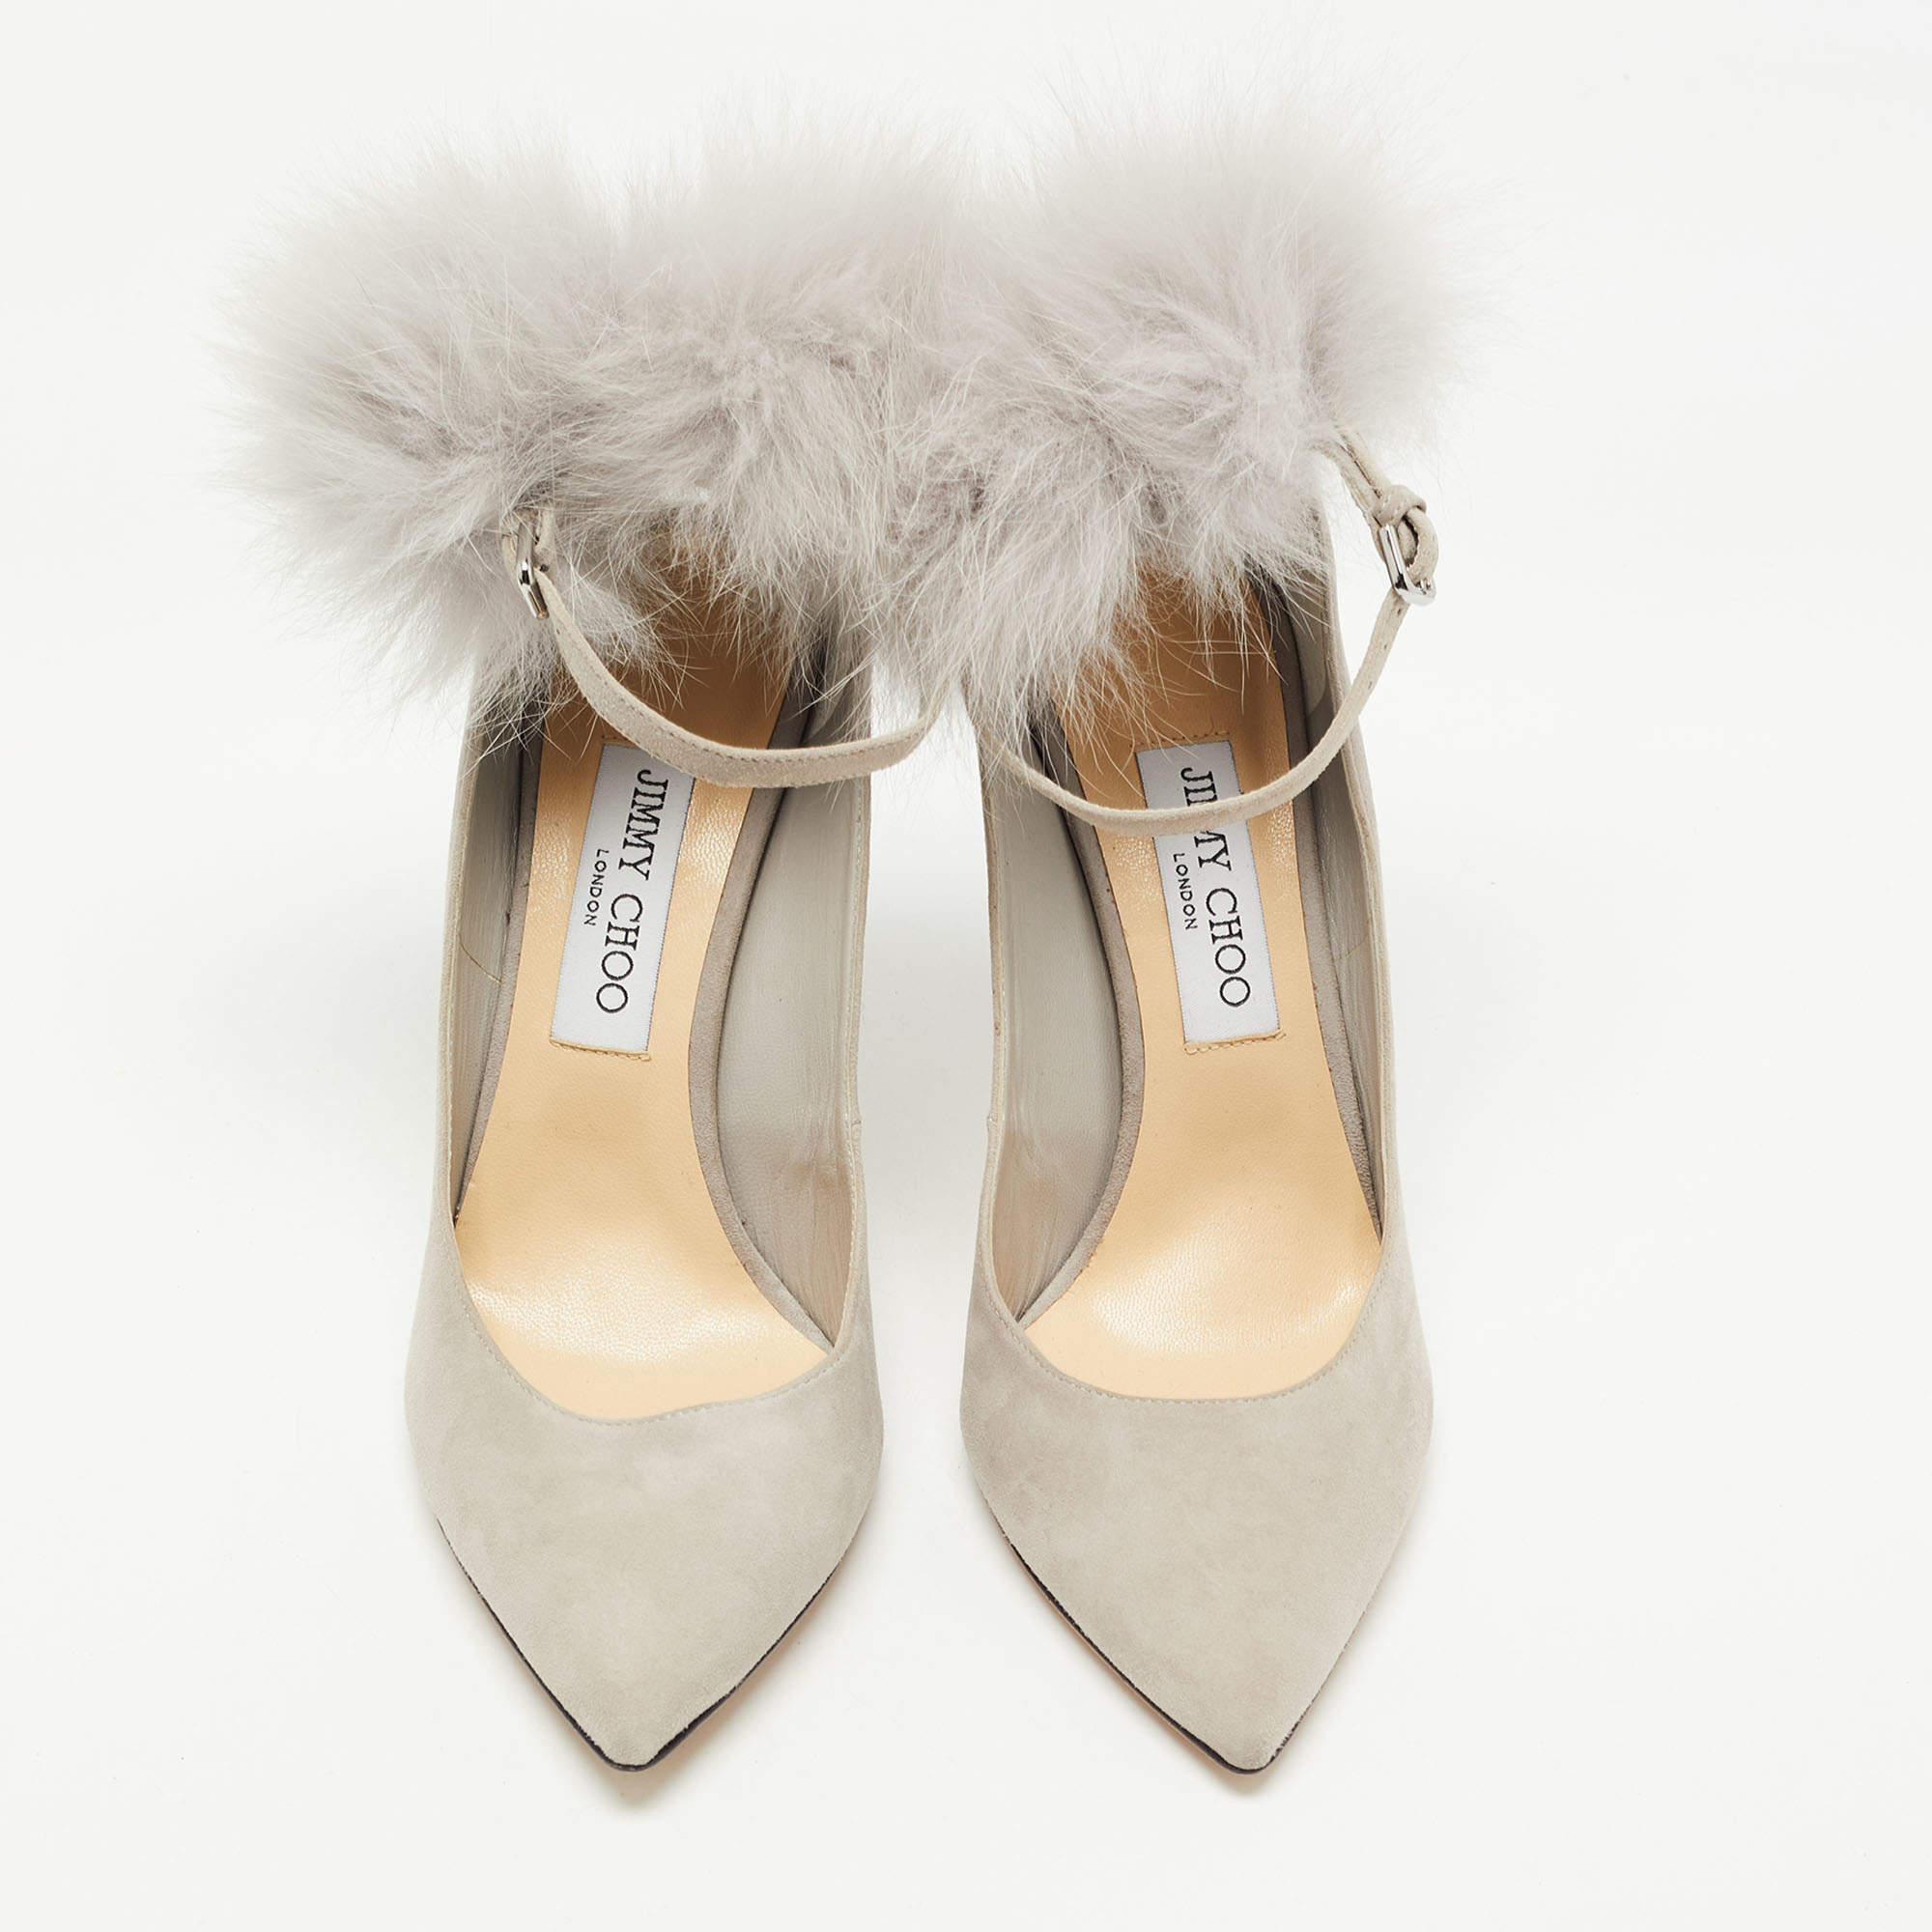 36 Fashionable and Fluffy Gifts For the Girl Who Loves Faux-Fur | Sandals  heels, Ankle strap sandals heels, Strappy block heel sandals